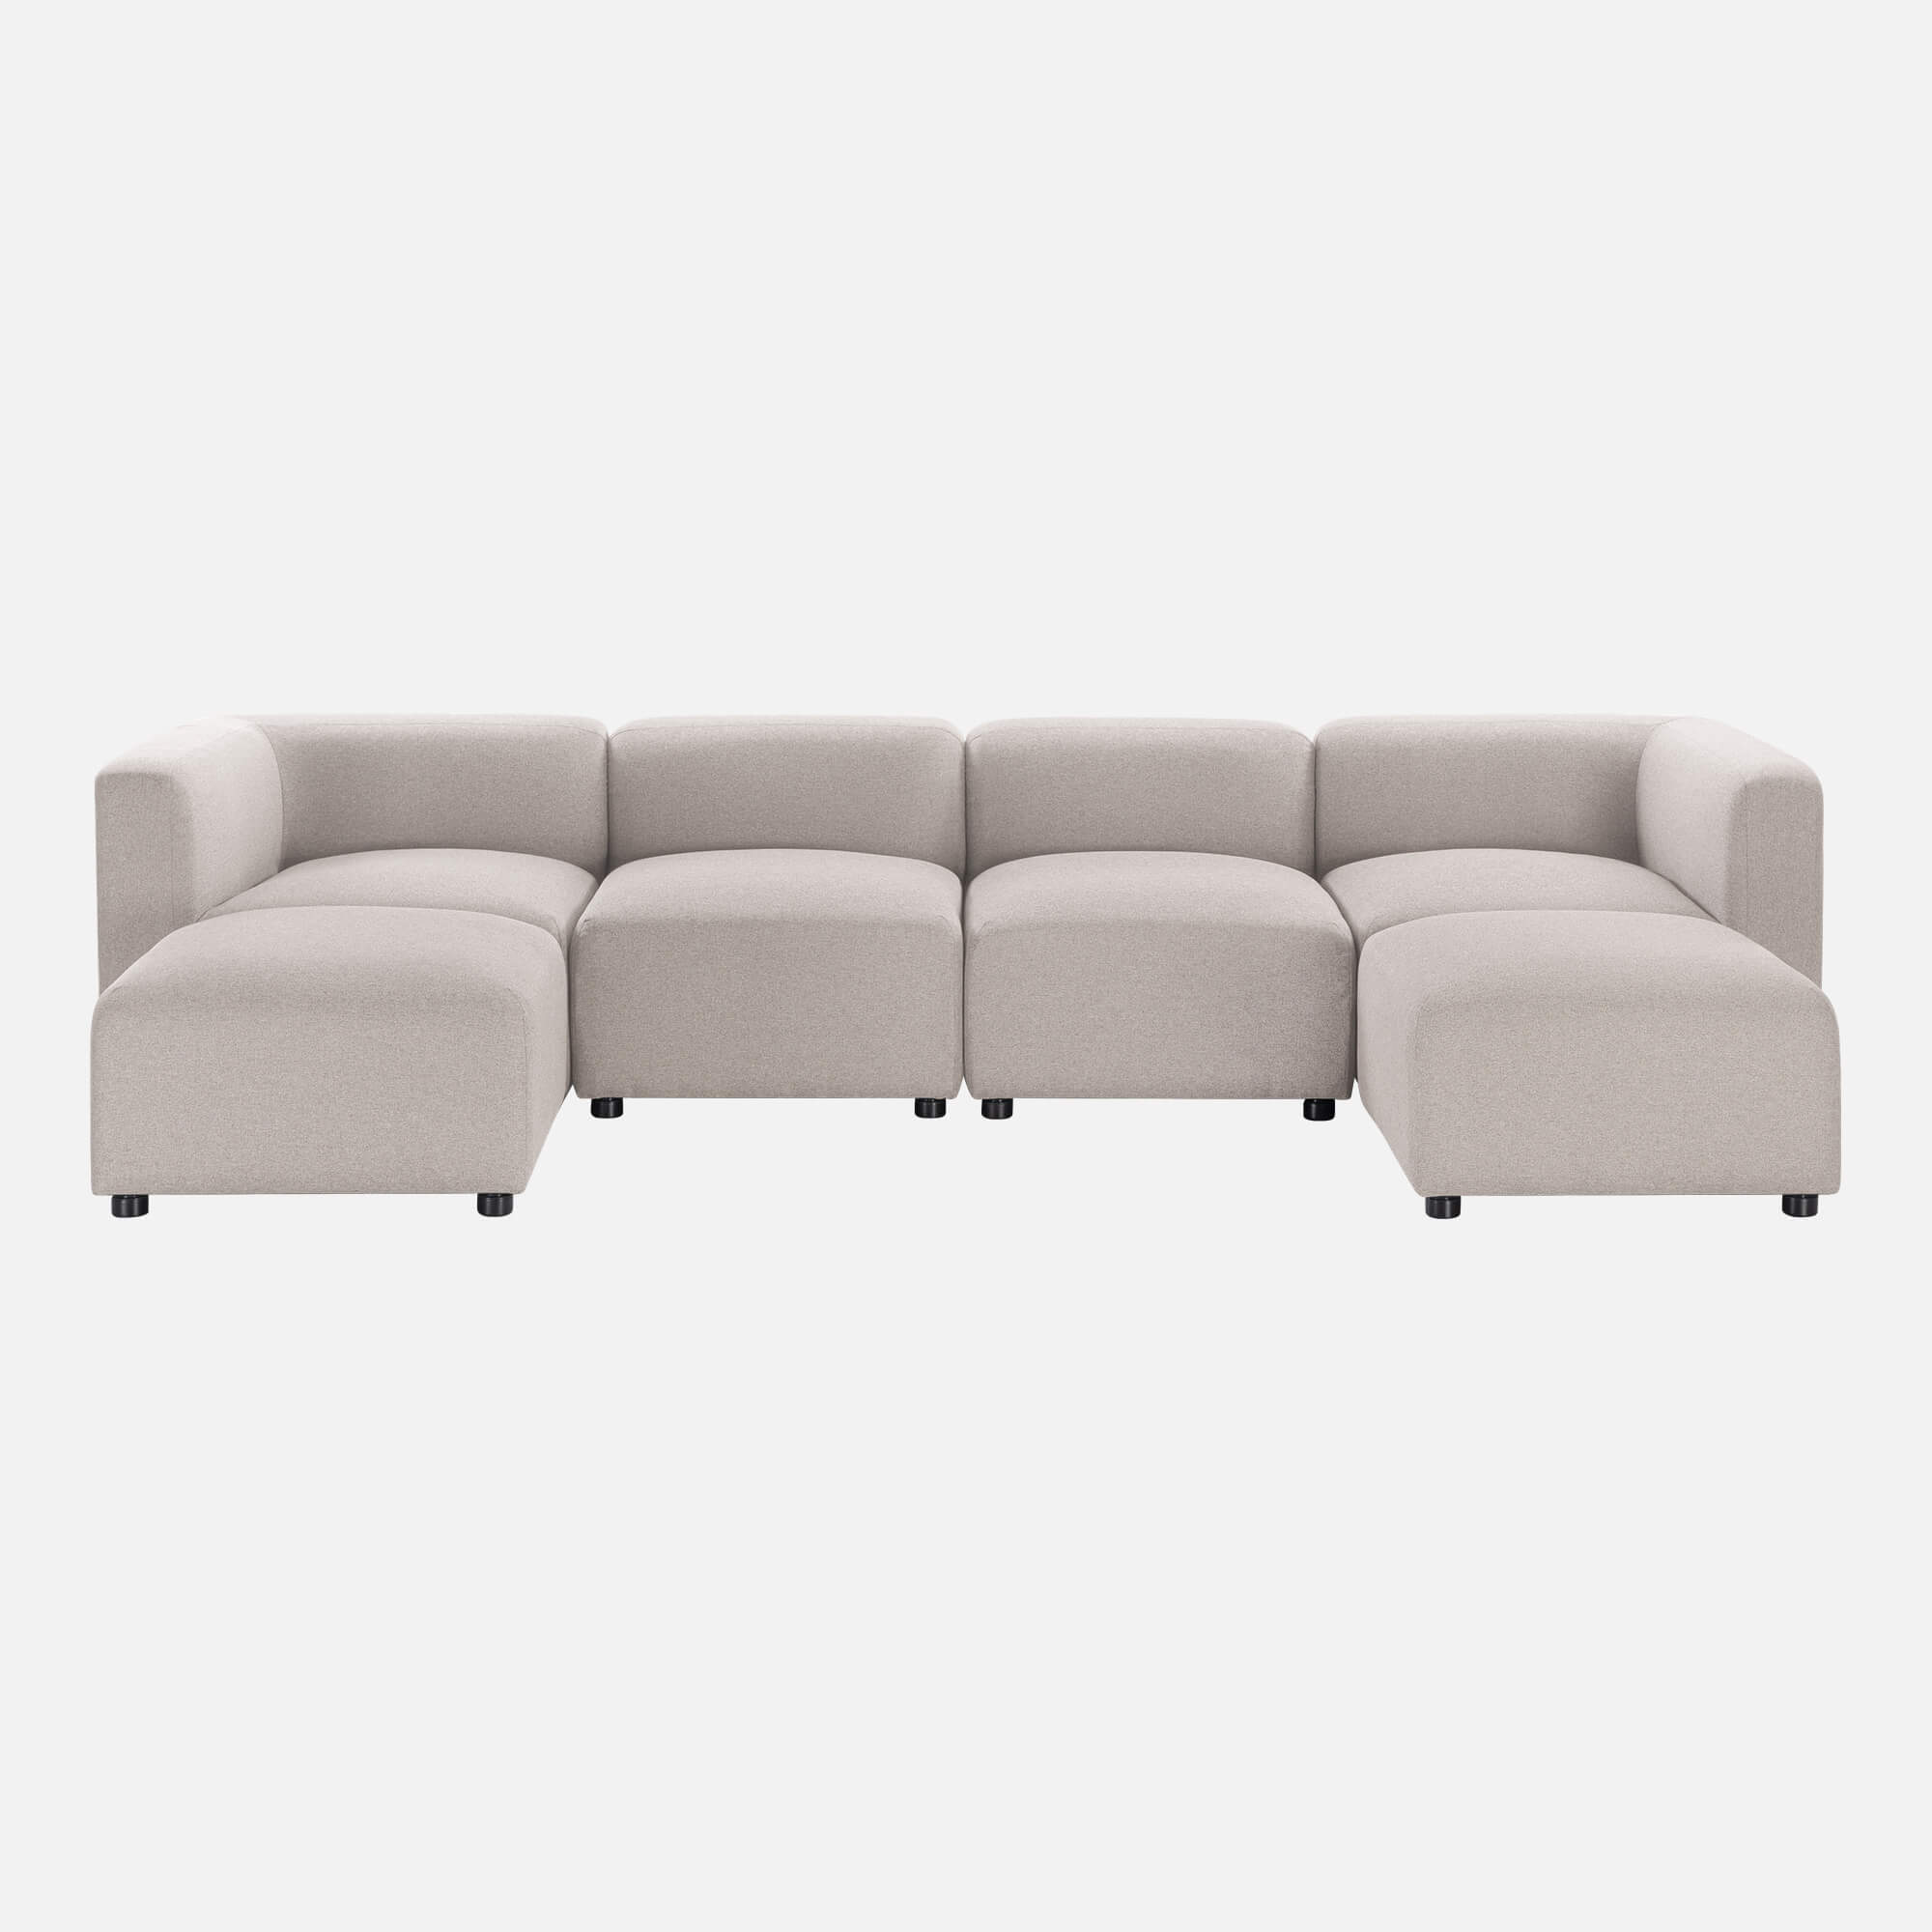 Luca Double Chaise Sectional Sofa in a contemporary design